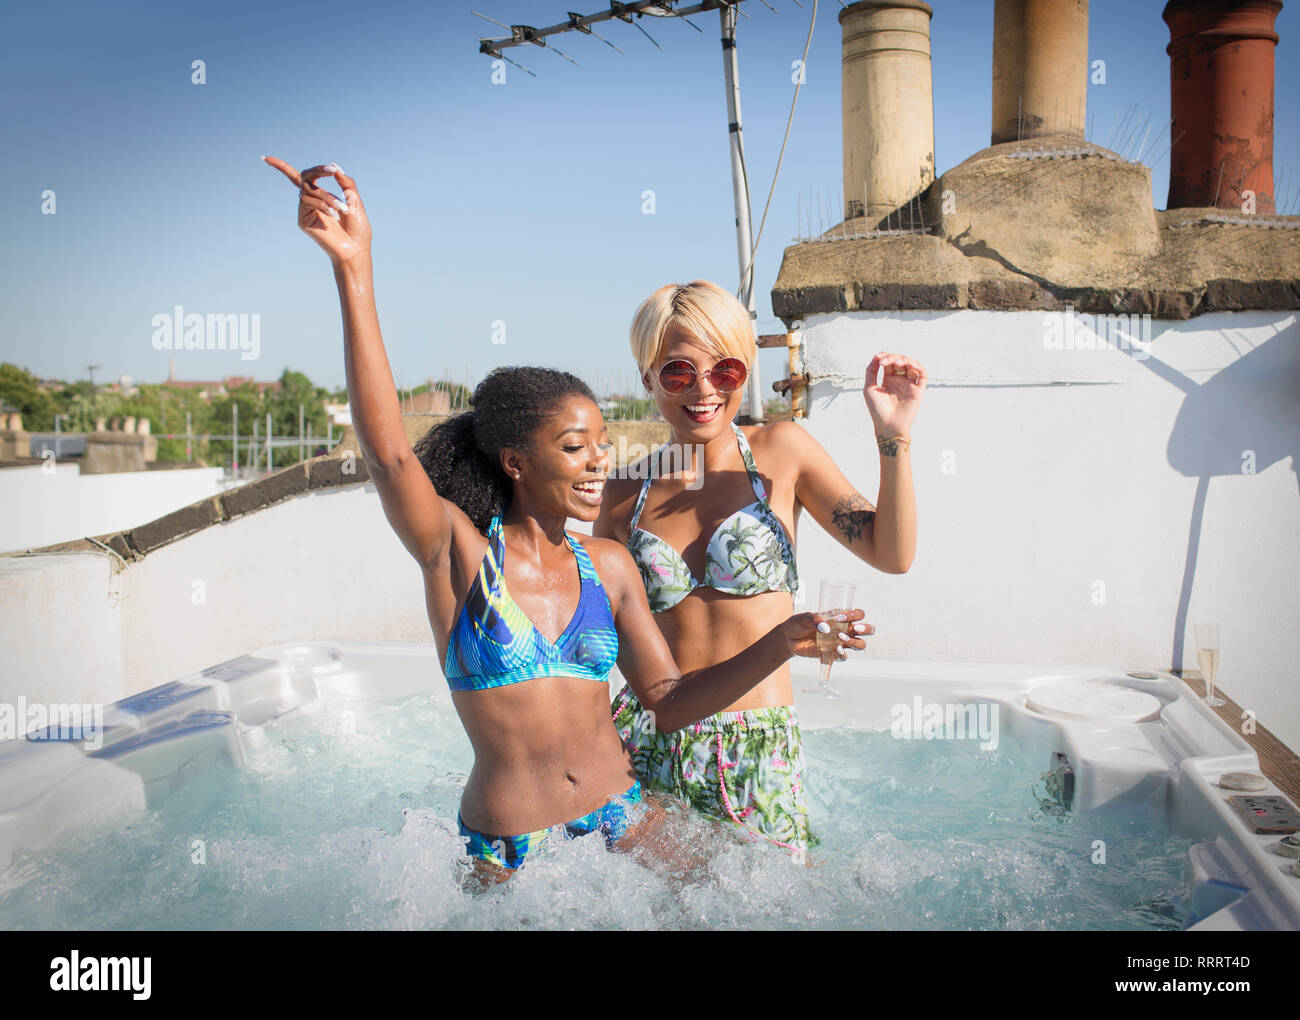 Portrait playful young women friends in bikinis dancing in sunny rooftop hot tub Stock Photo